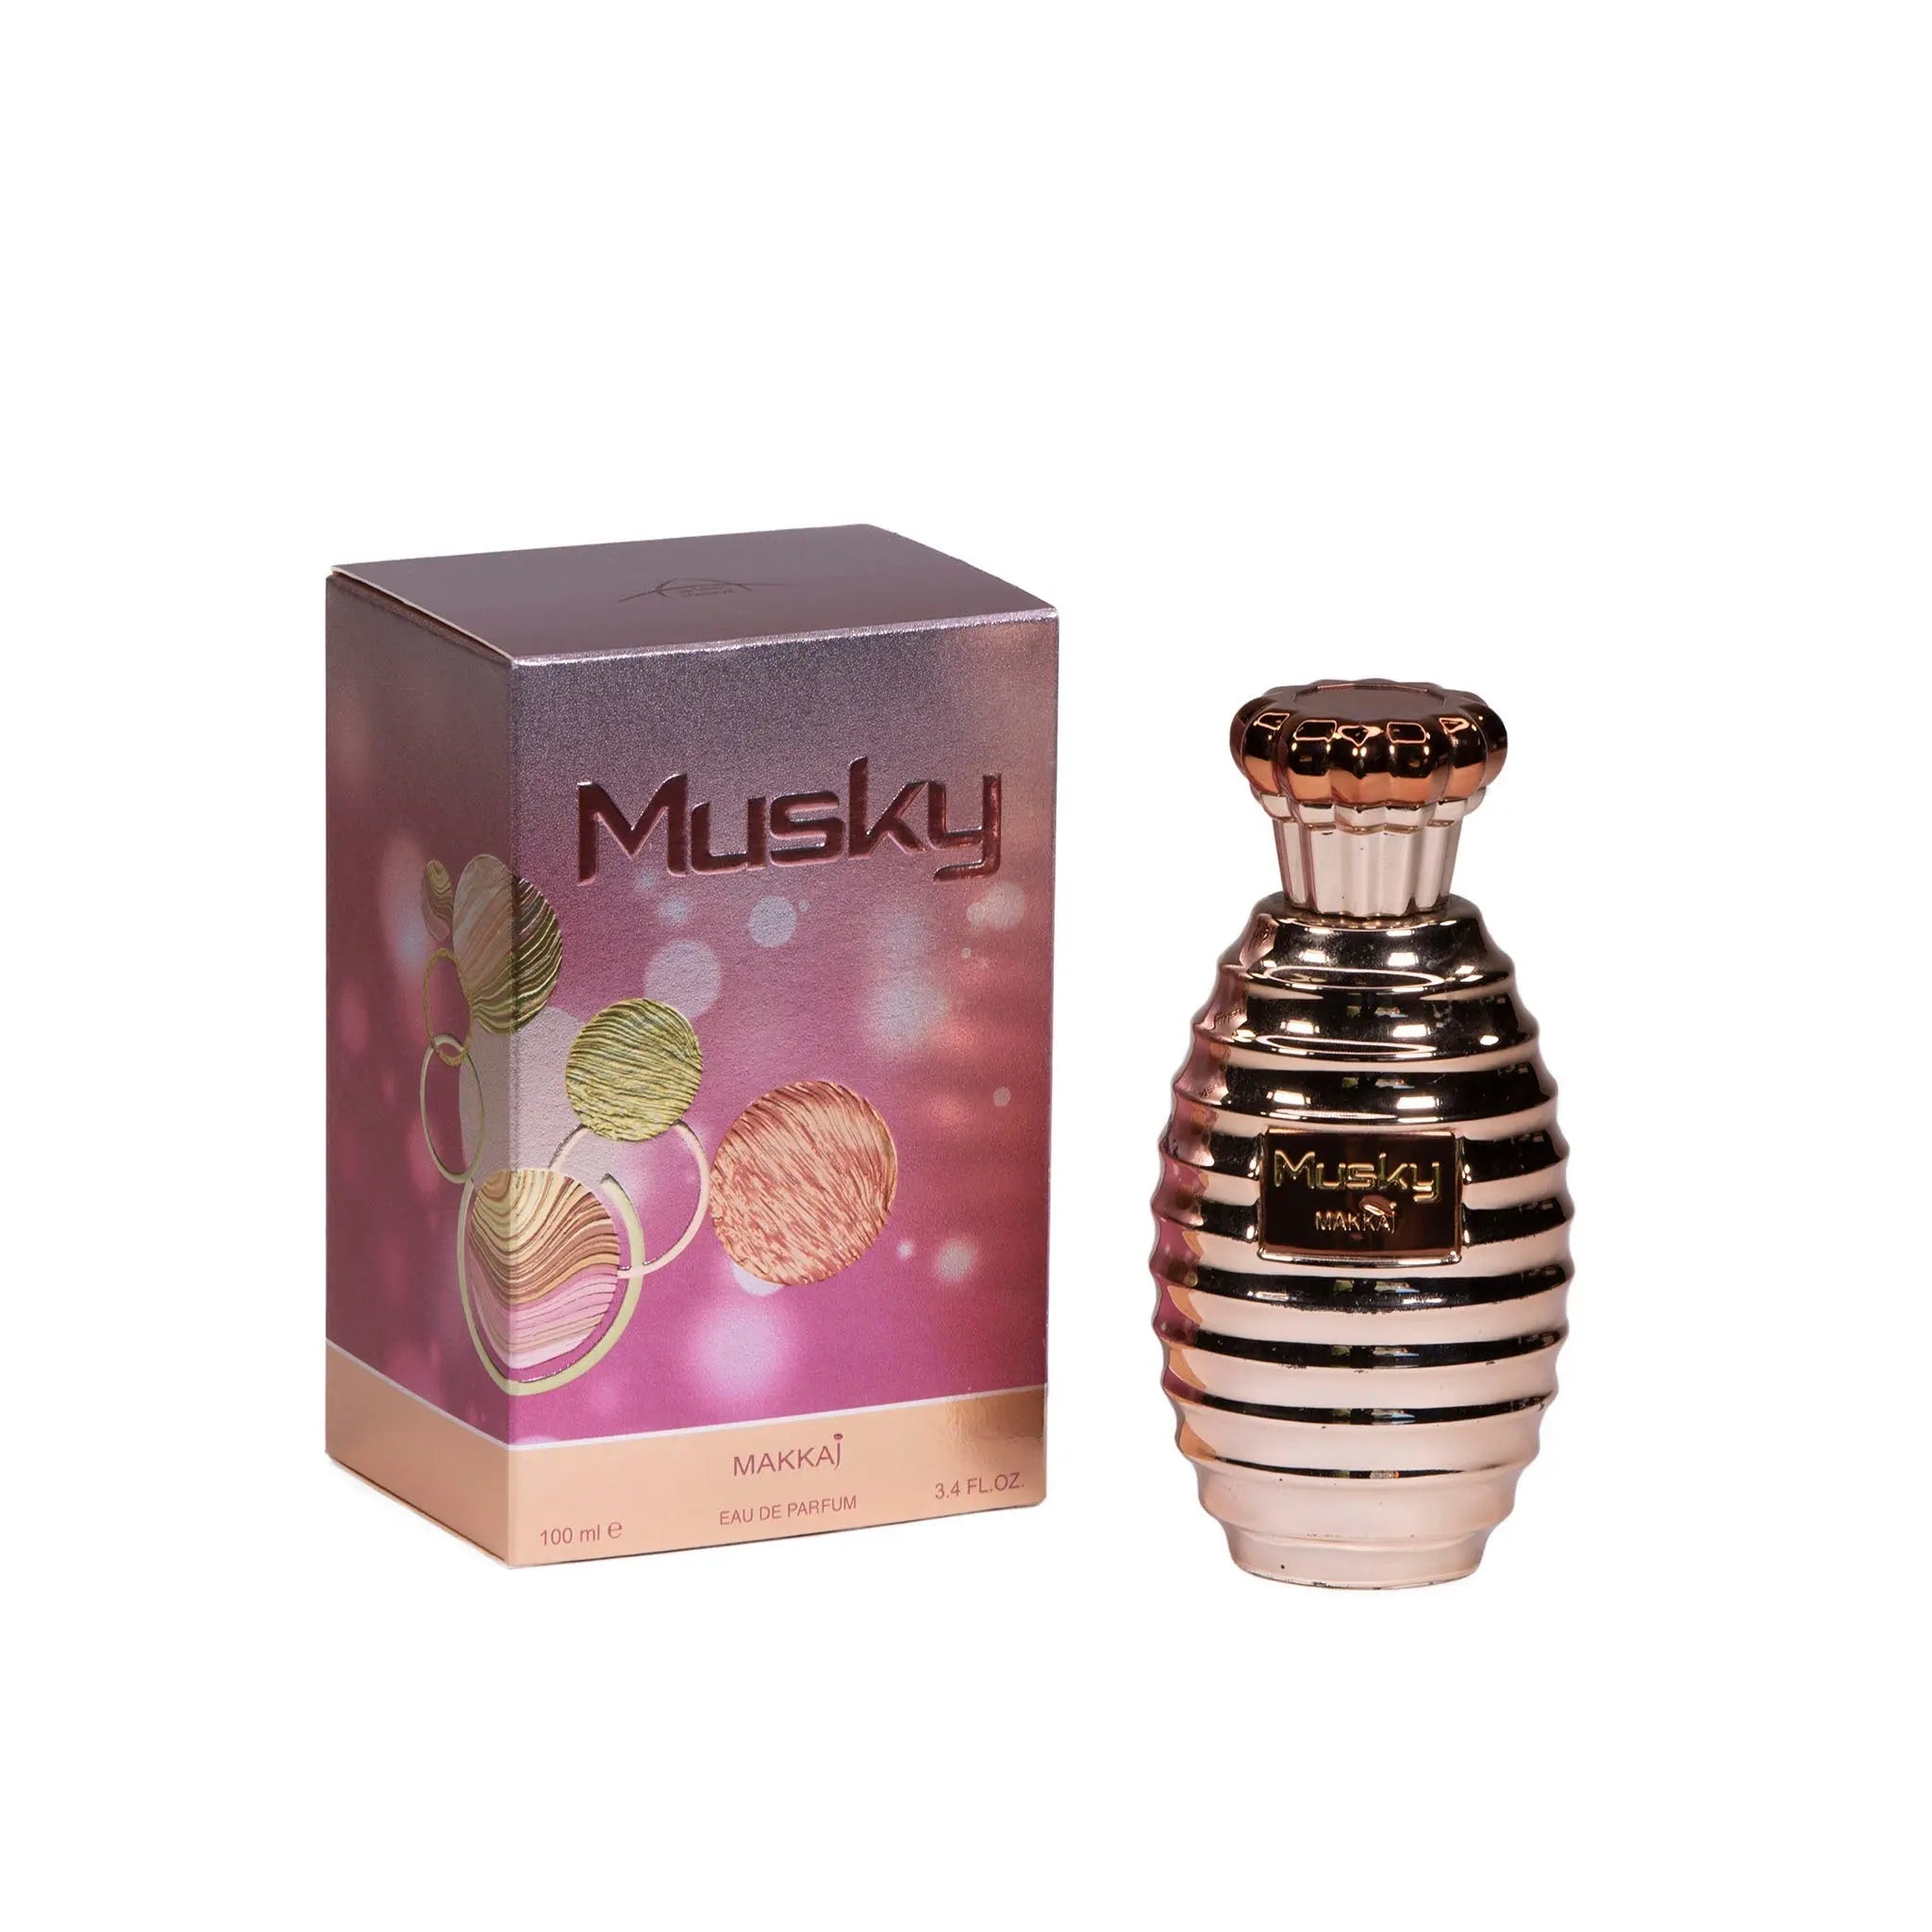 The image shows a product called "Musky Makkaj," which is a perfume. Displayed are both the perfume bottle and its packaging box. The bottle is metallic pink with horizontal stripes and a decorative gold and black cap. The box is purple with a gradient effect, decorated with stylized illustrations of plants in gold, pink, and green, and features the name "Musky" prominently with a smaller "Makkaj" below it.